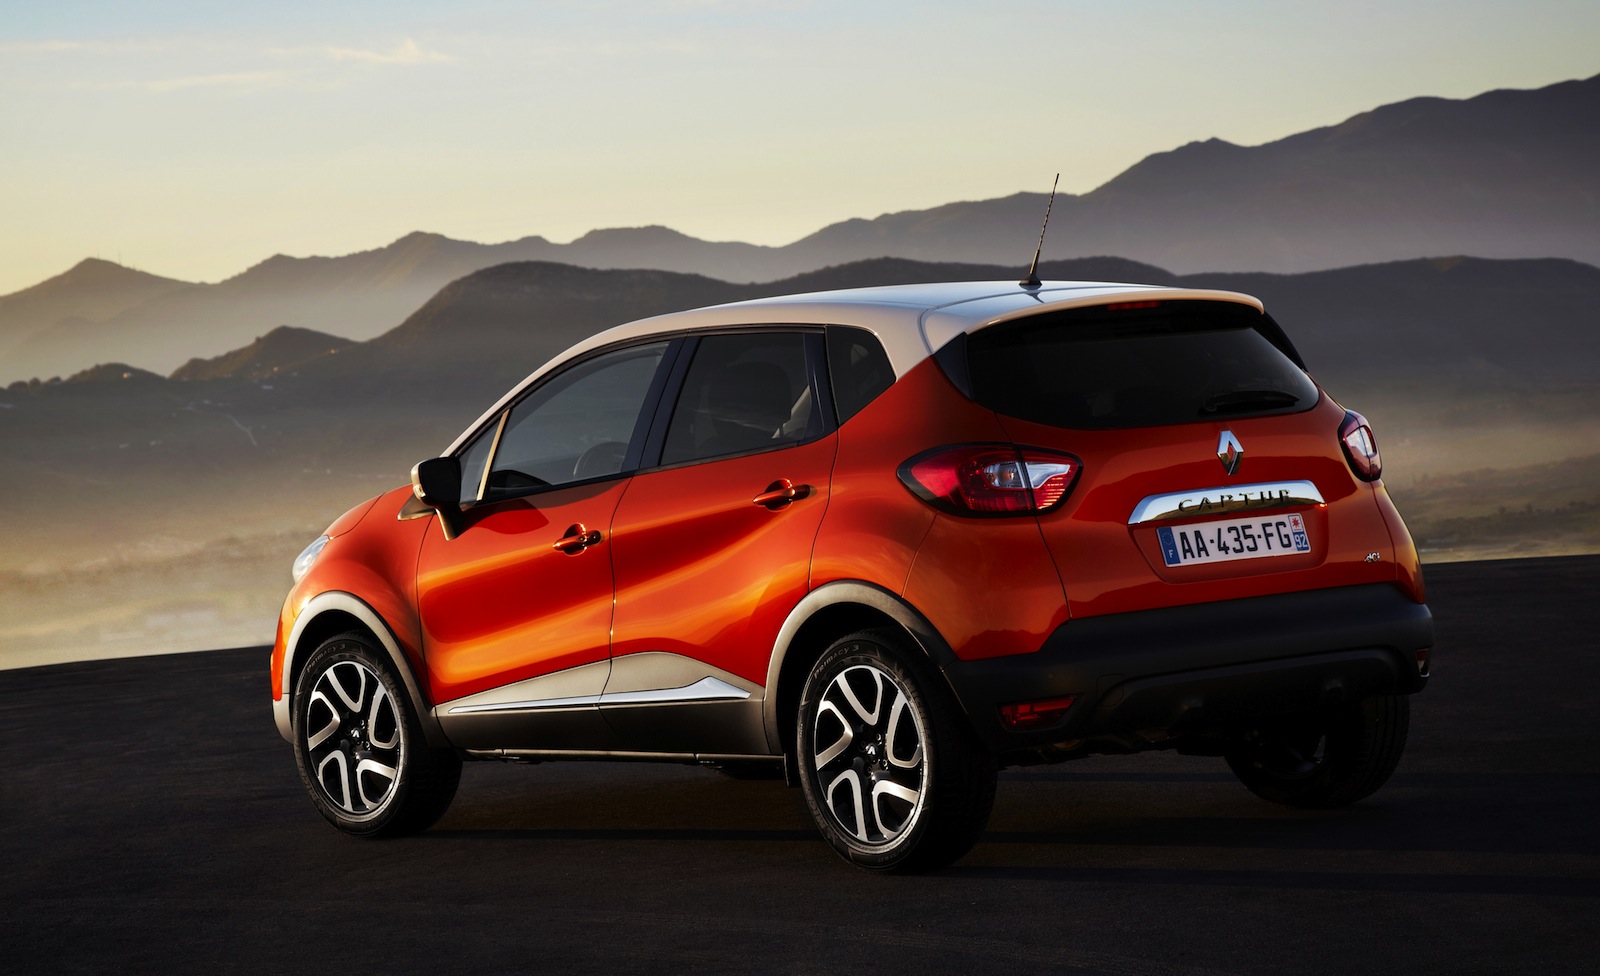 Renault Captur French baby SUV revealed Photos (1 of 26)